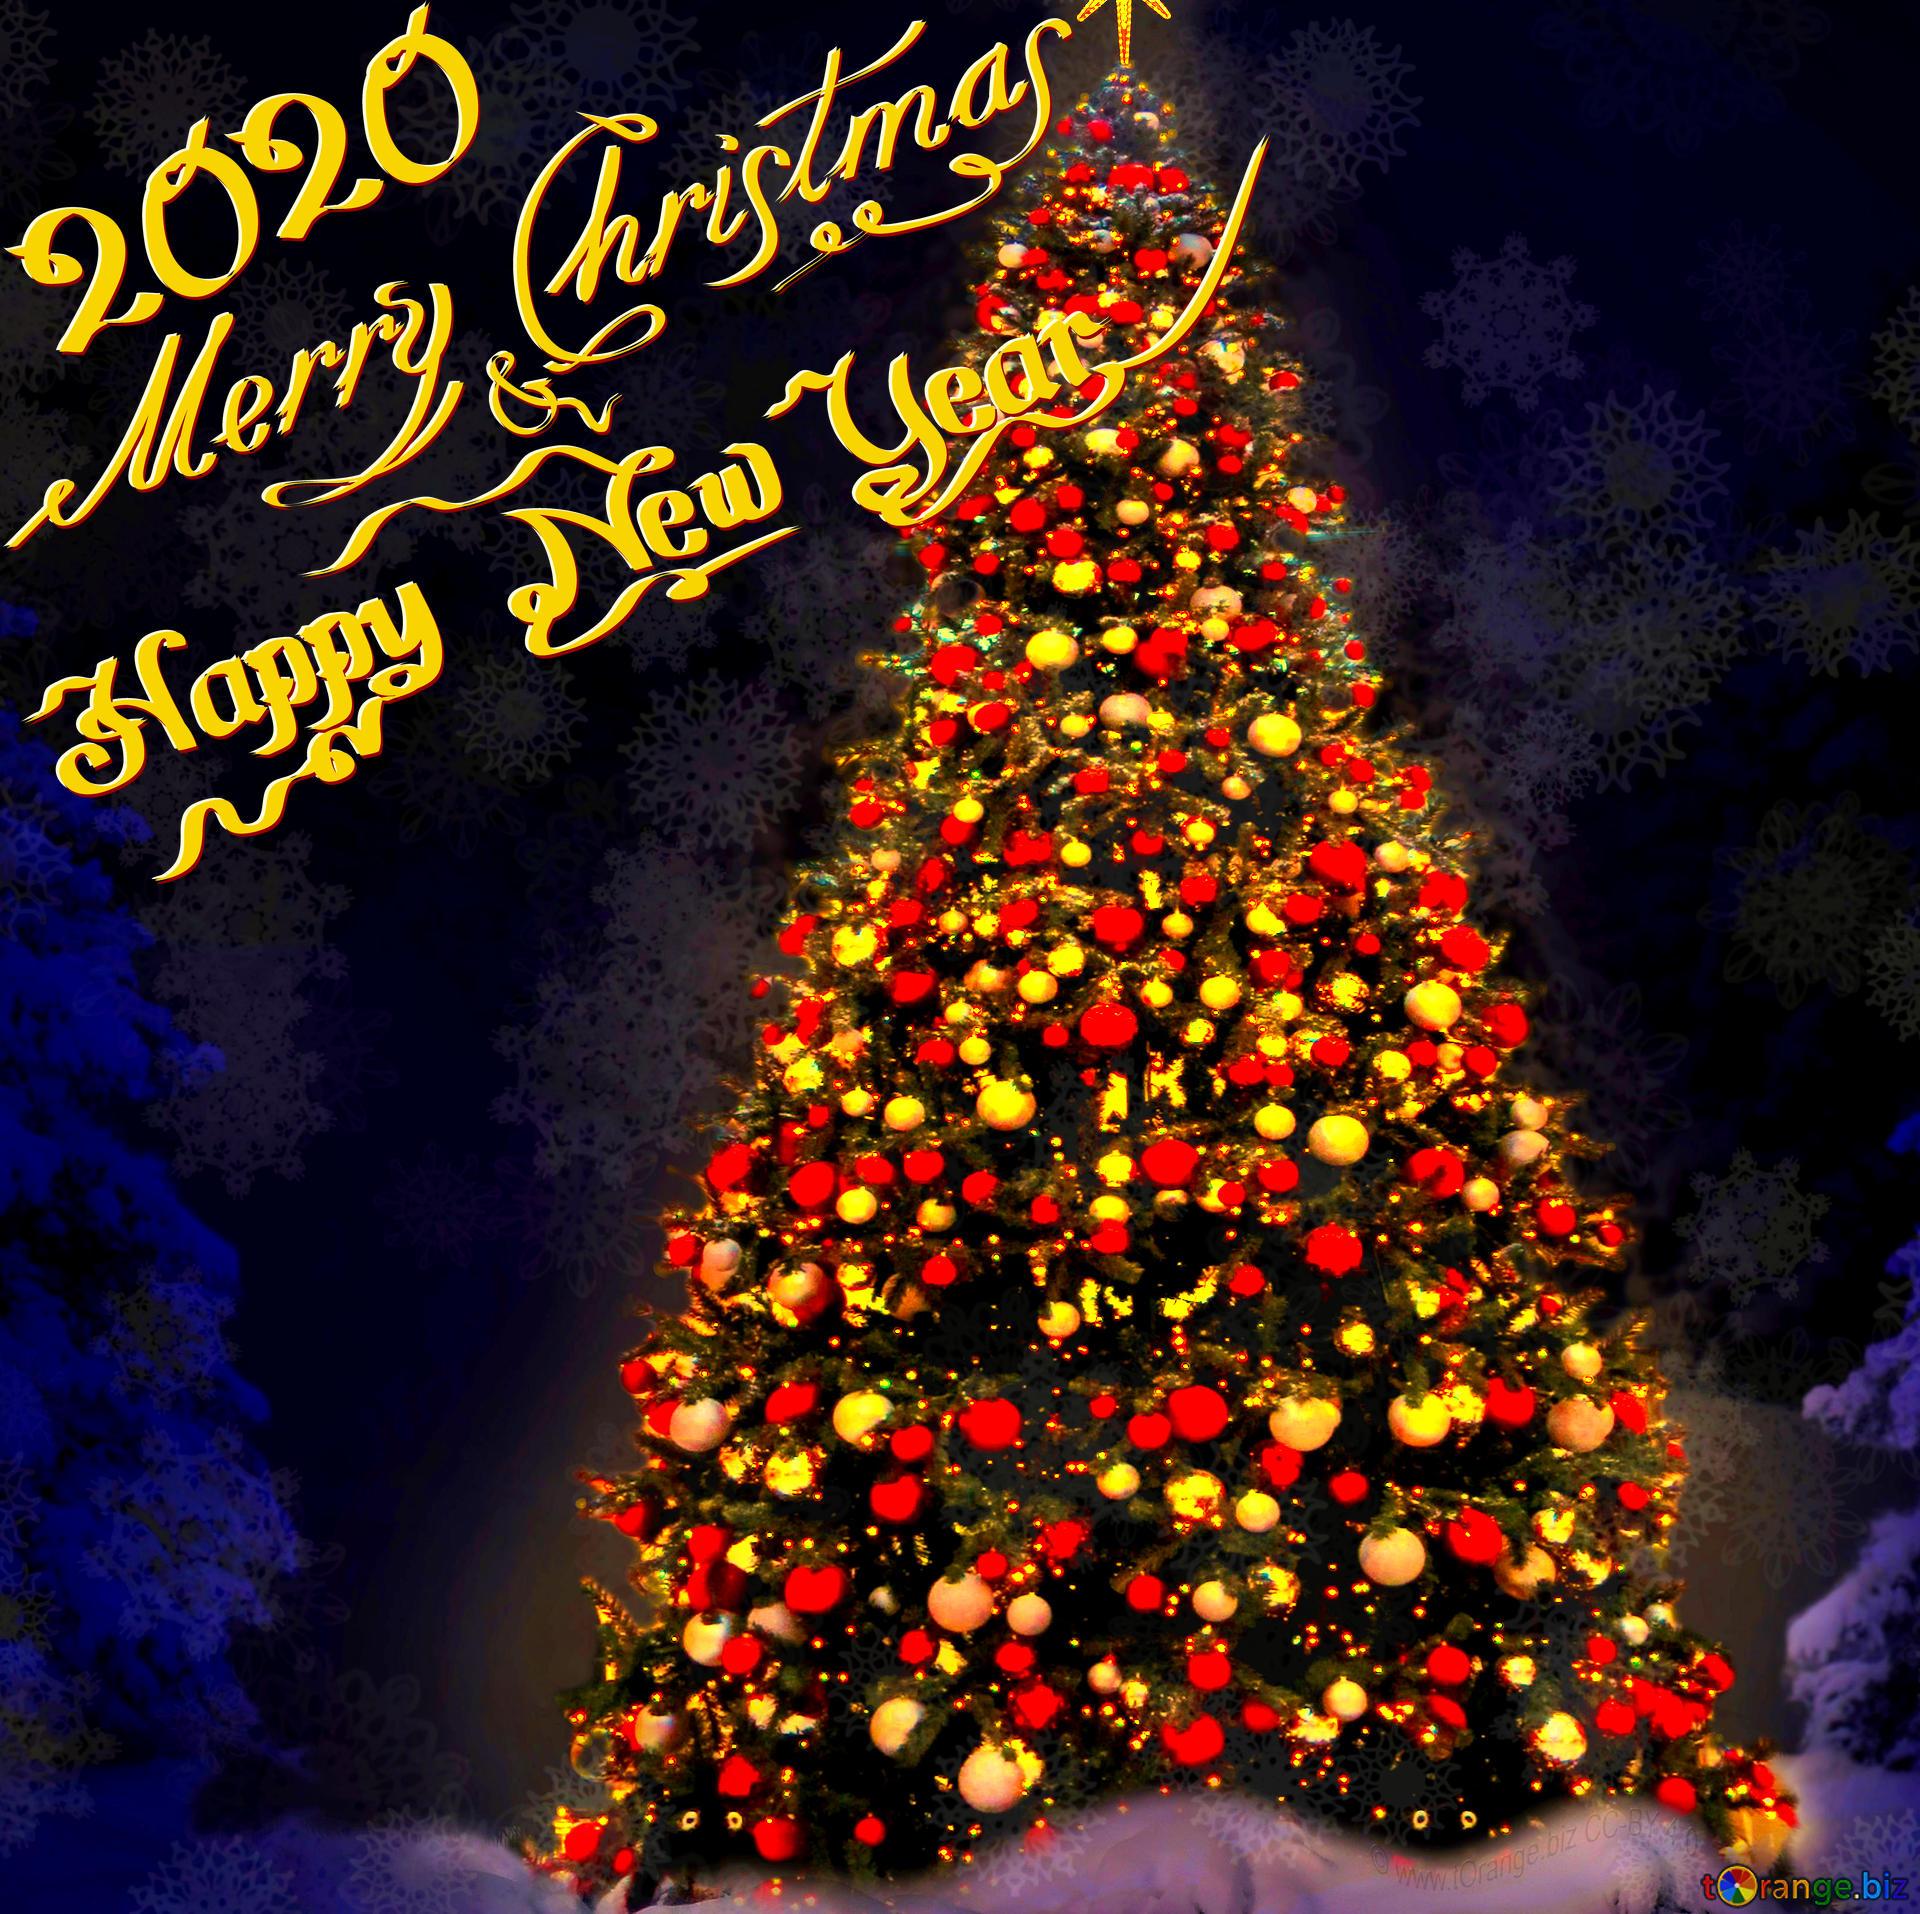 Merry Christmas 2020 Wallpapers - Wallpaper Cave